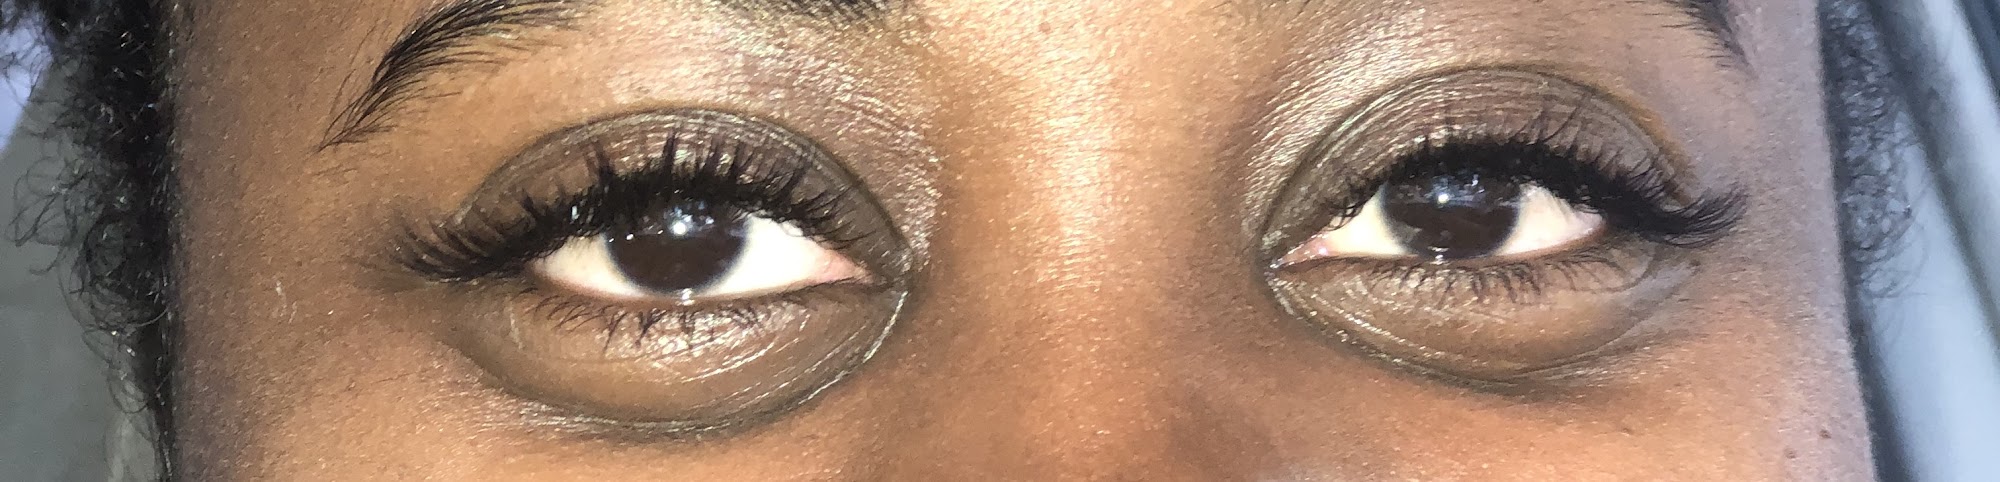 The Amira Experience - Lash Extensions